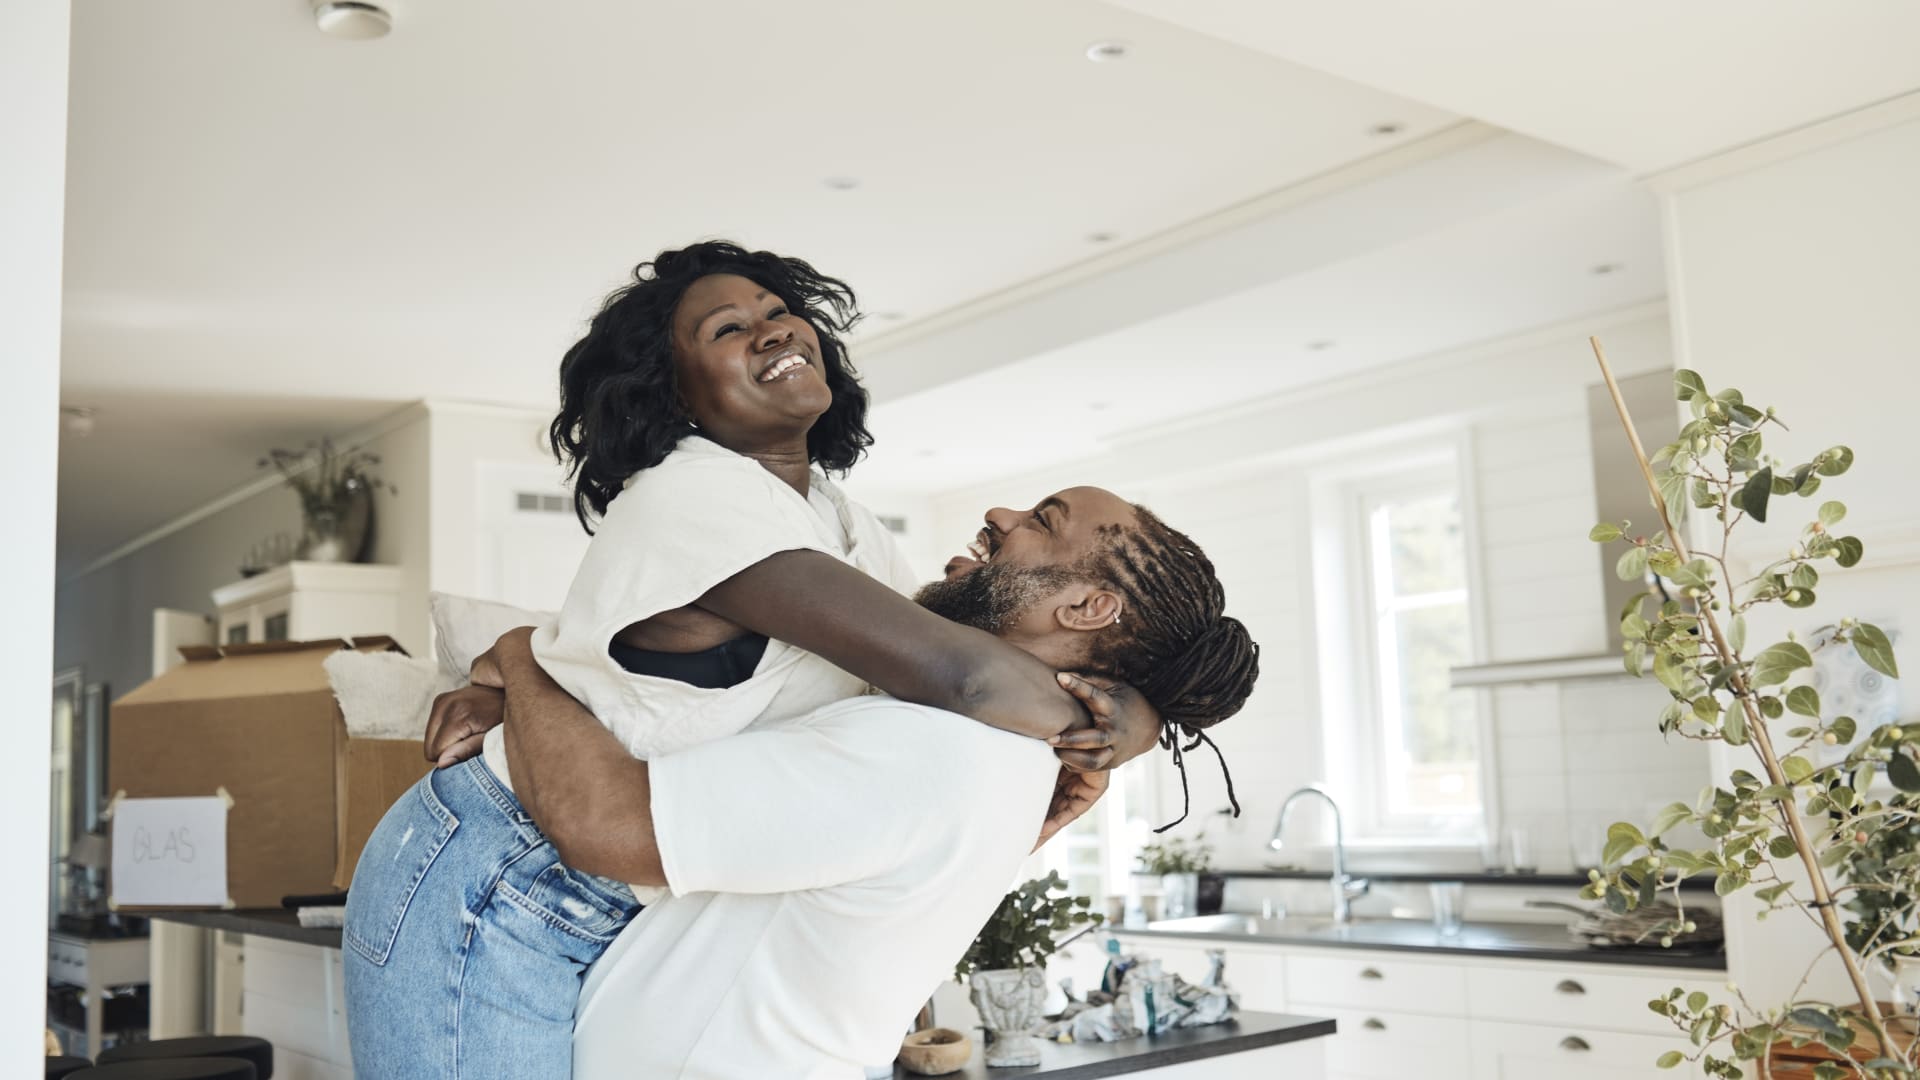 52% of Black Americans say homeownership is a mark of success, report finds. But it can conflict with other goals